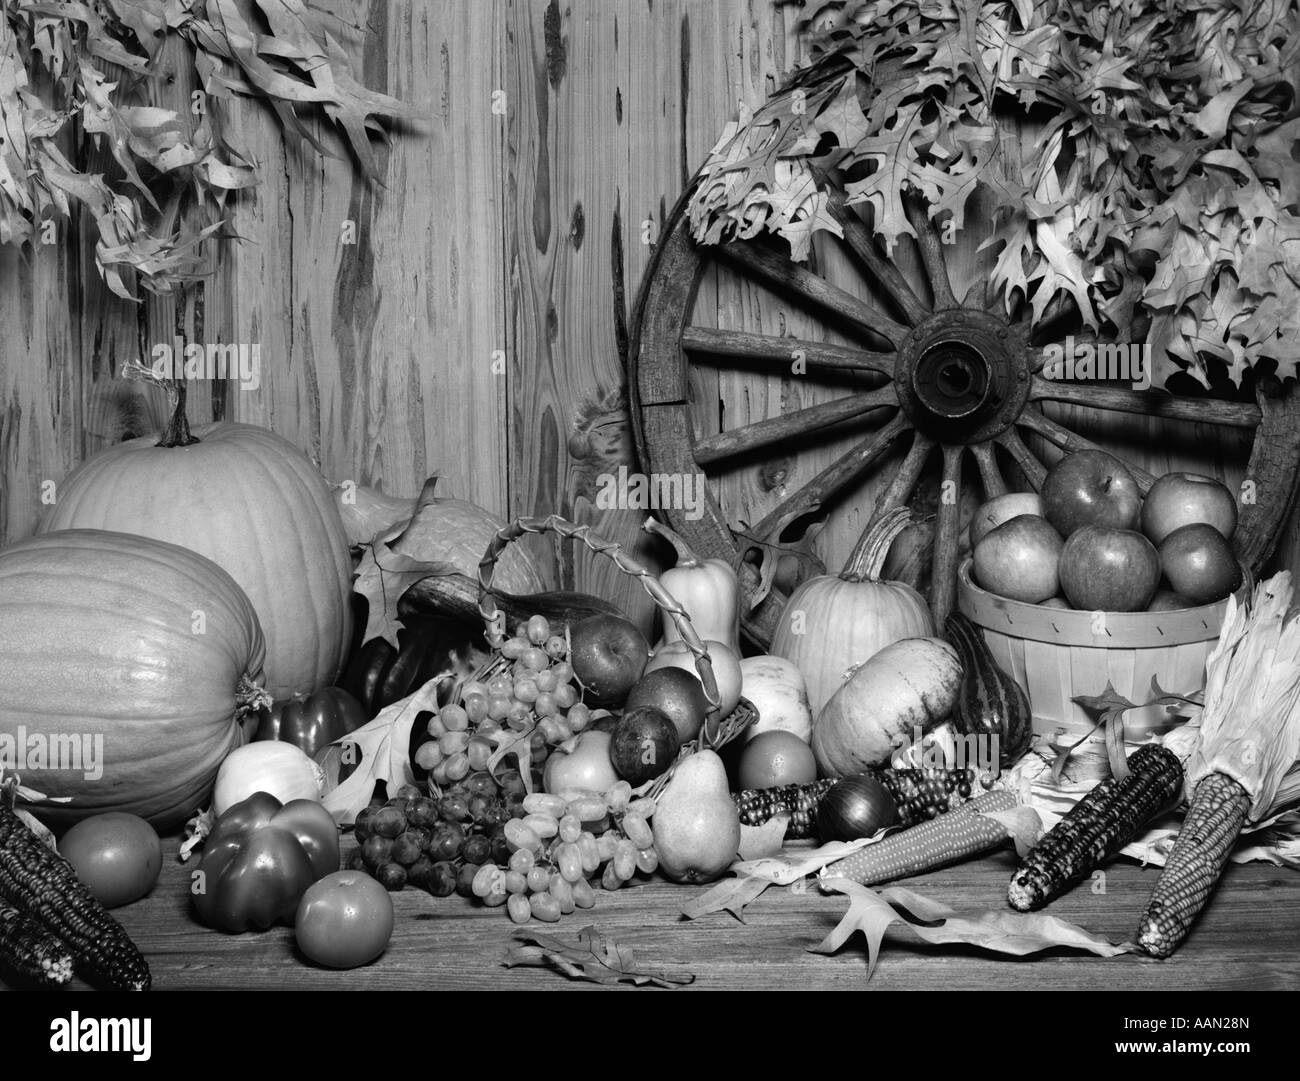 1970s STILL LIFE OF FALL HARVEST FRUITS & VEGETABLES SET UP IN FRONT OF WAGON WHEEL Stock Photo